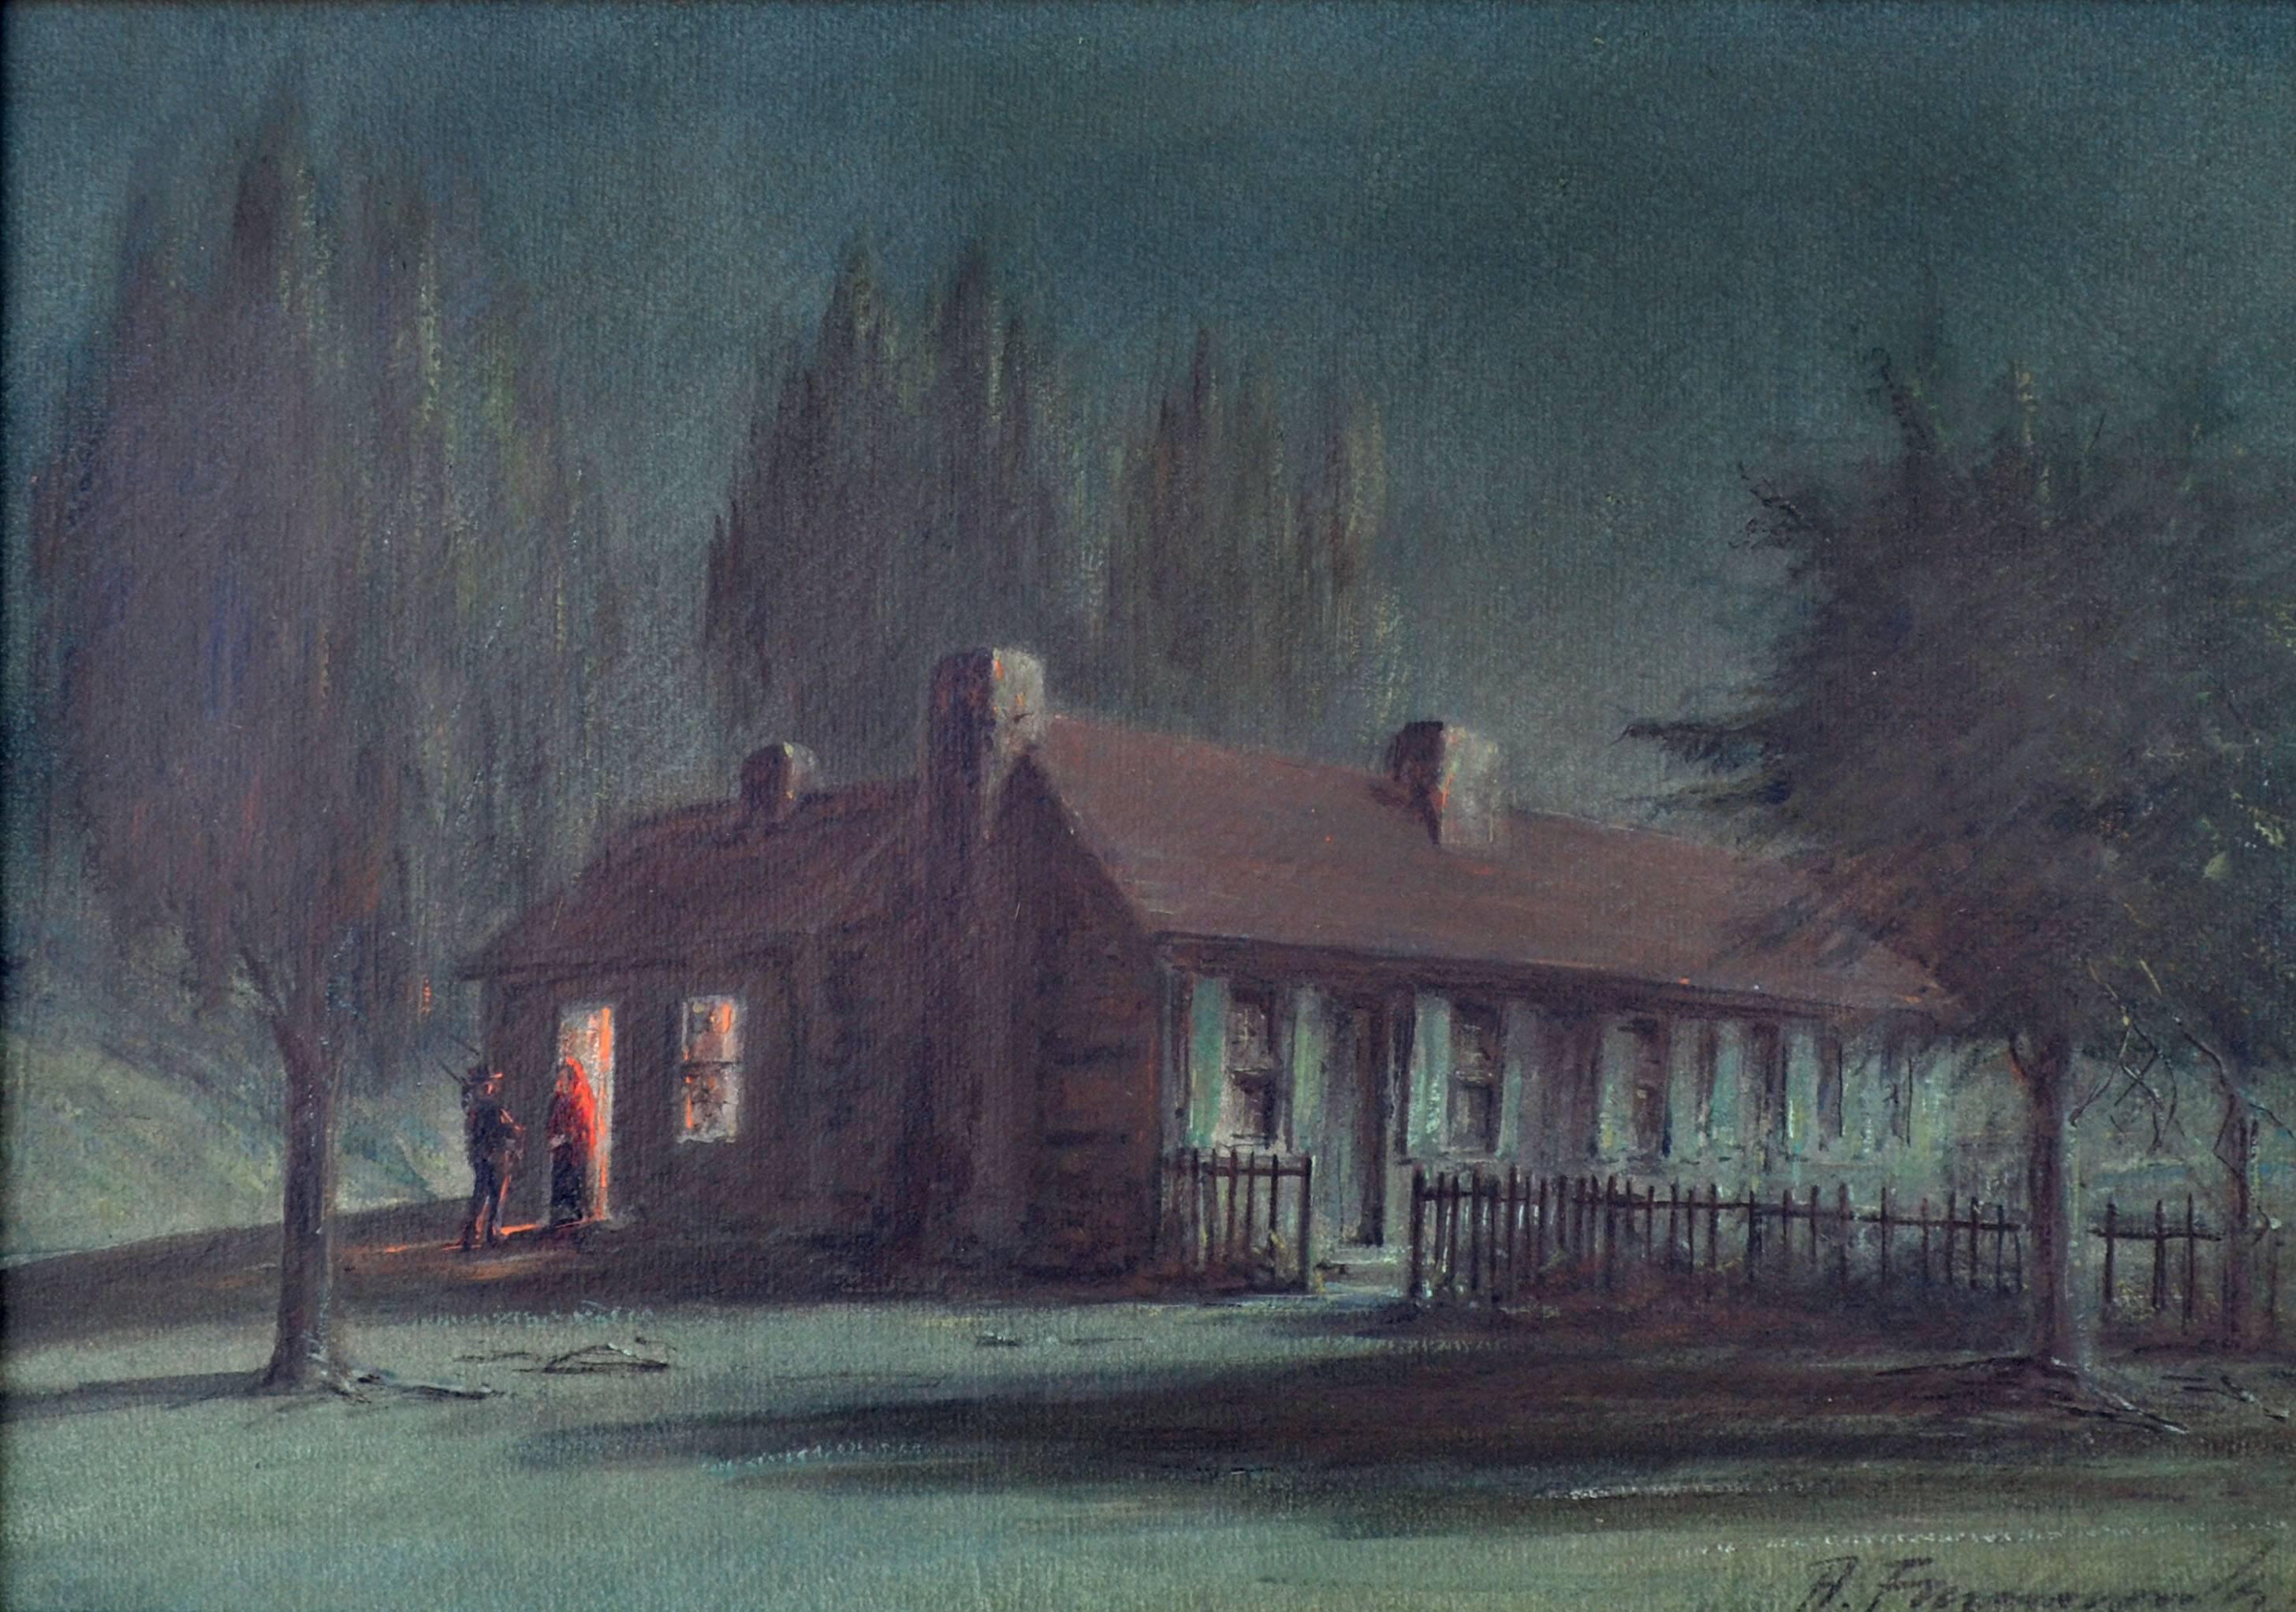 Late 19th Cent. Nocturnal Figurative Landscape - Night Caller, California Adobe  - Painting by Alfred Farnsworth